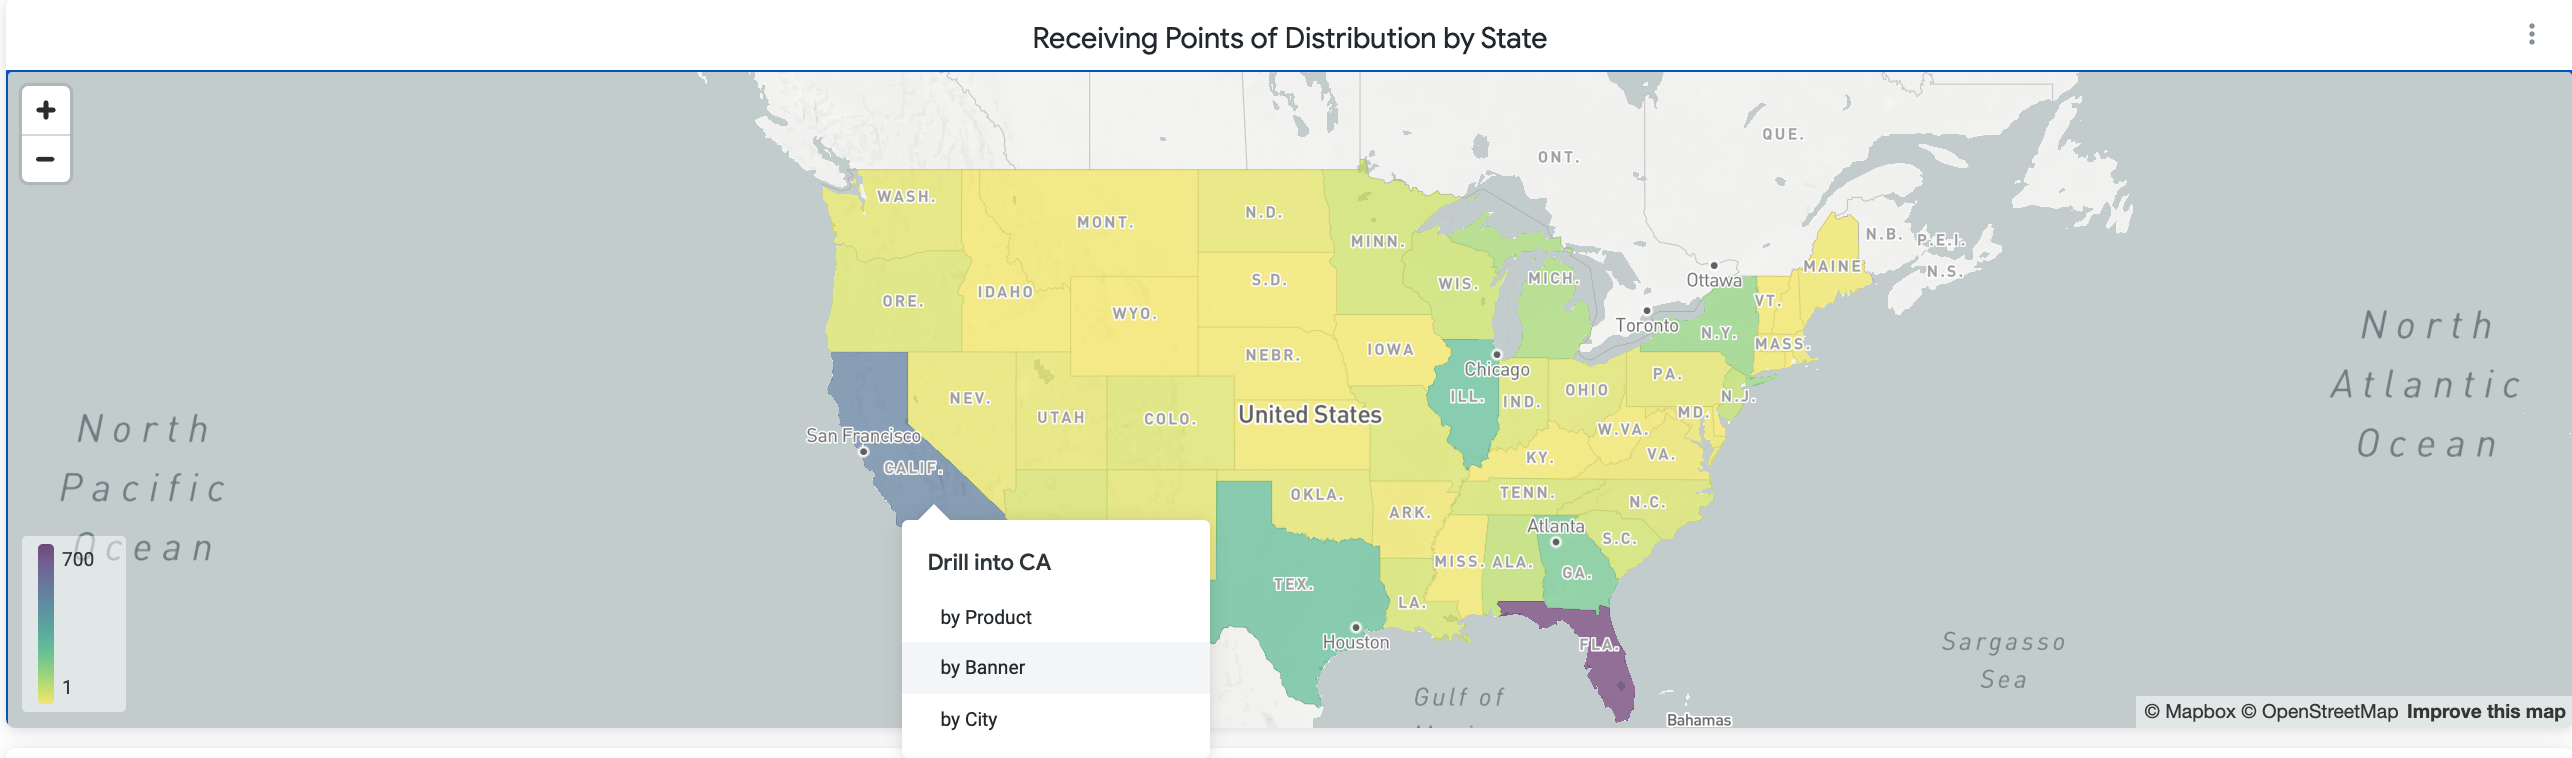 Receiving_Points_of_Distribution_by_State.png